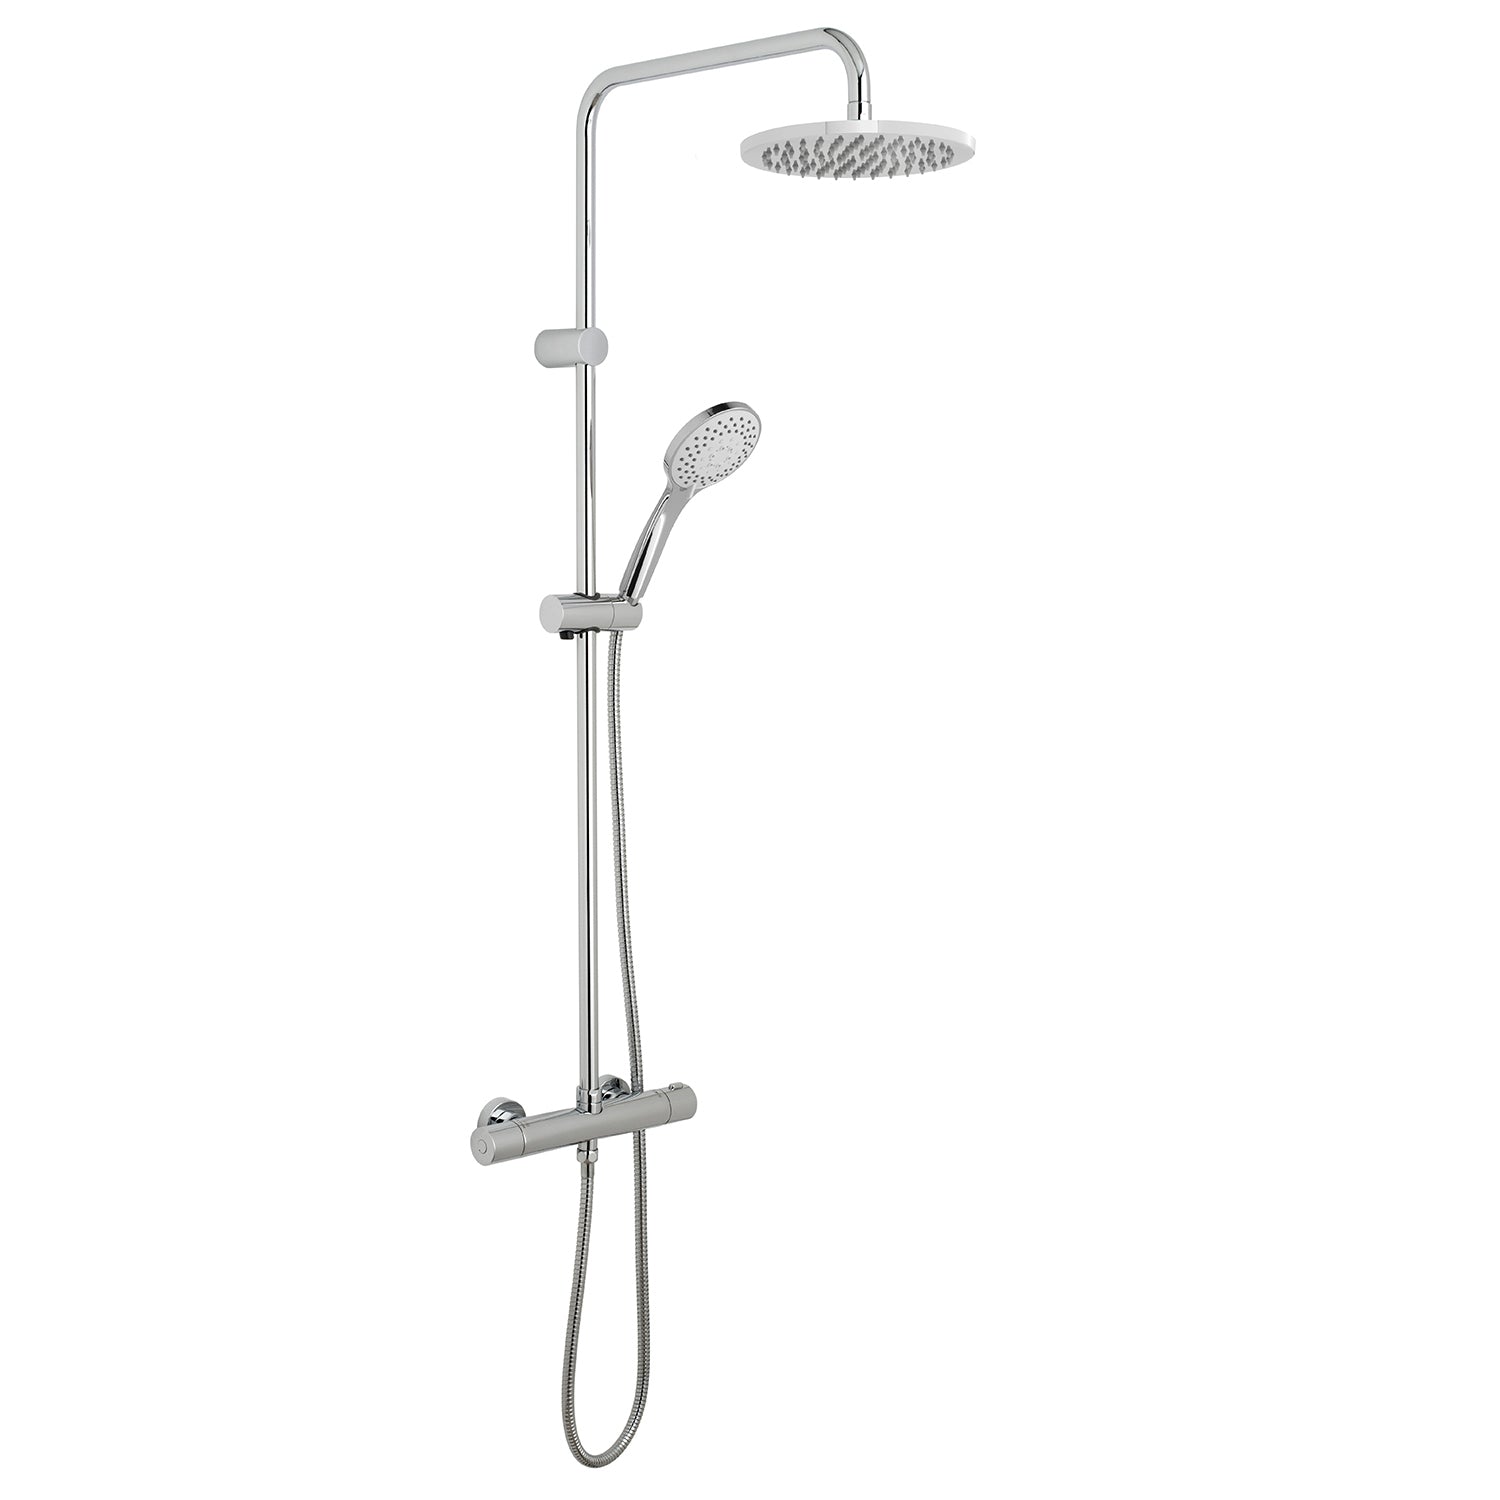 Vado Velo Round thermostatic shower valve with integrated diverter and rigid riser with single function shower head and shower handset